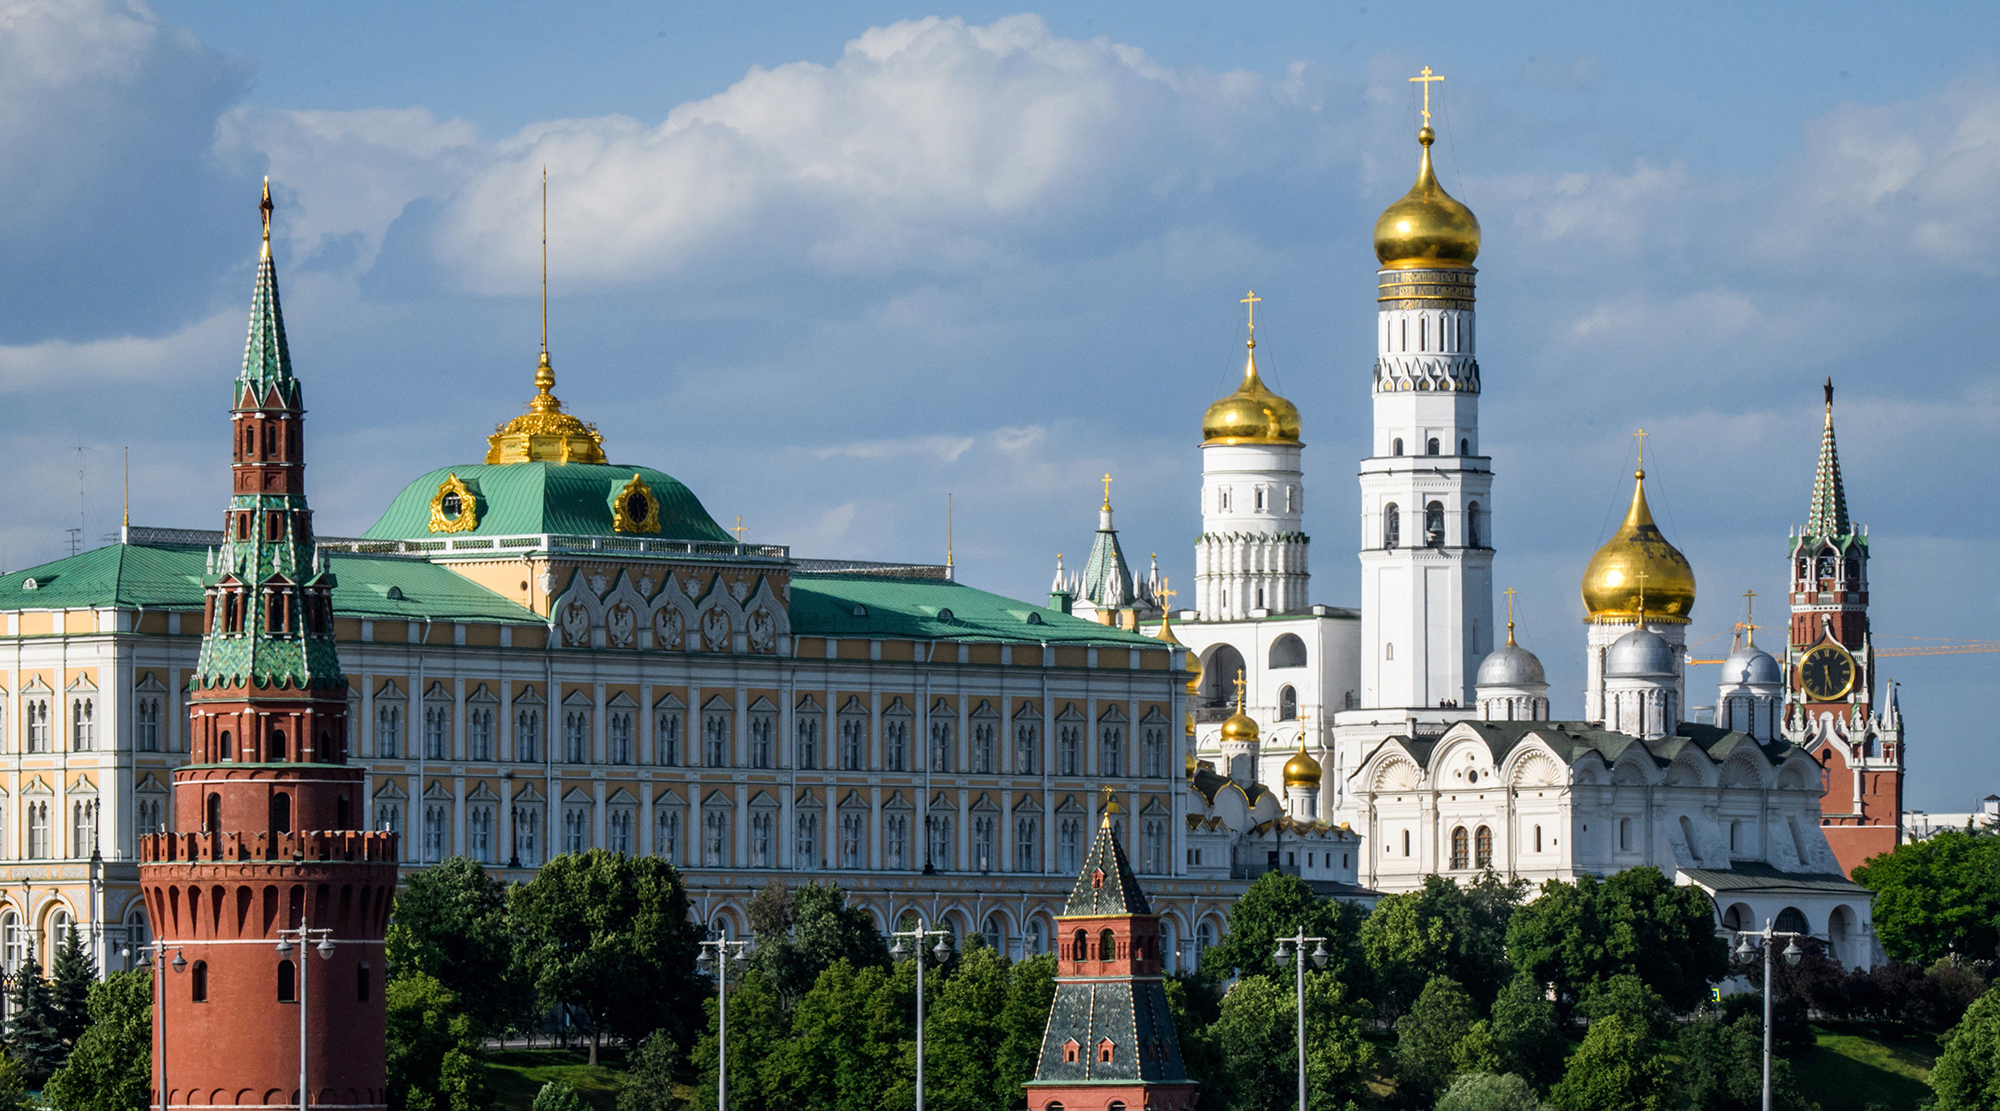 The Kremlin in Moscow, Russia, on May 30, 2018.